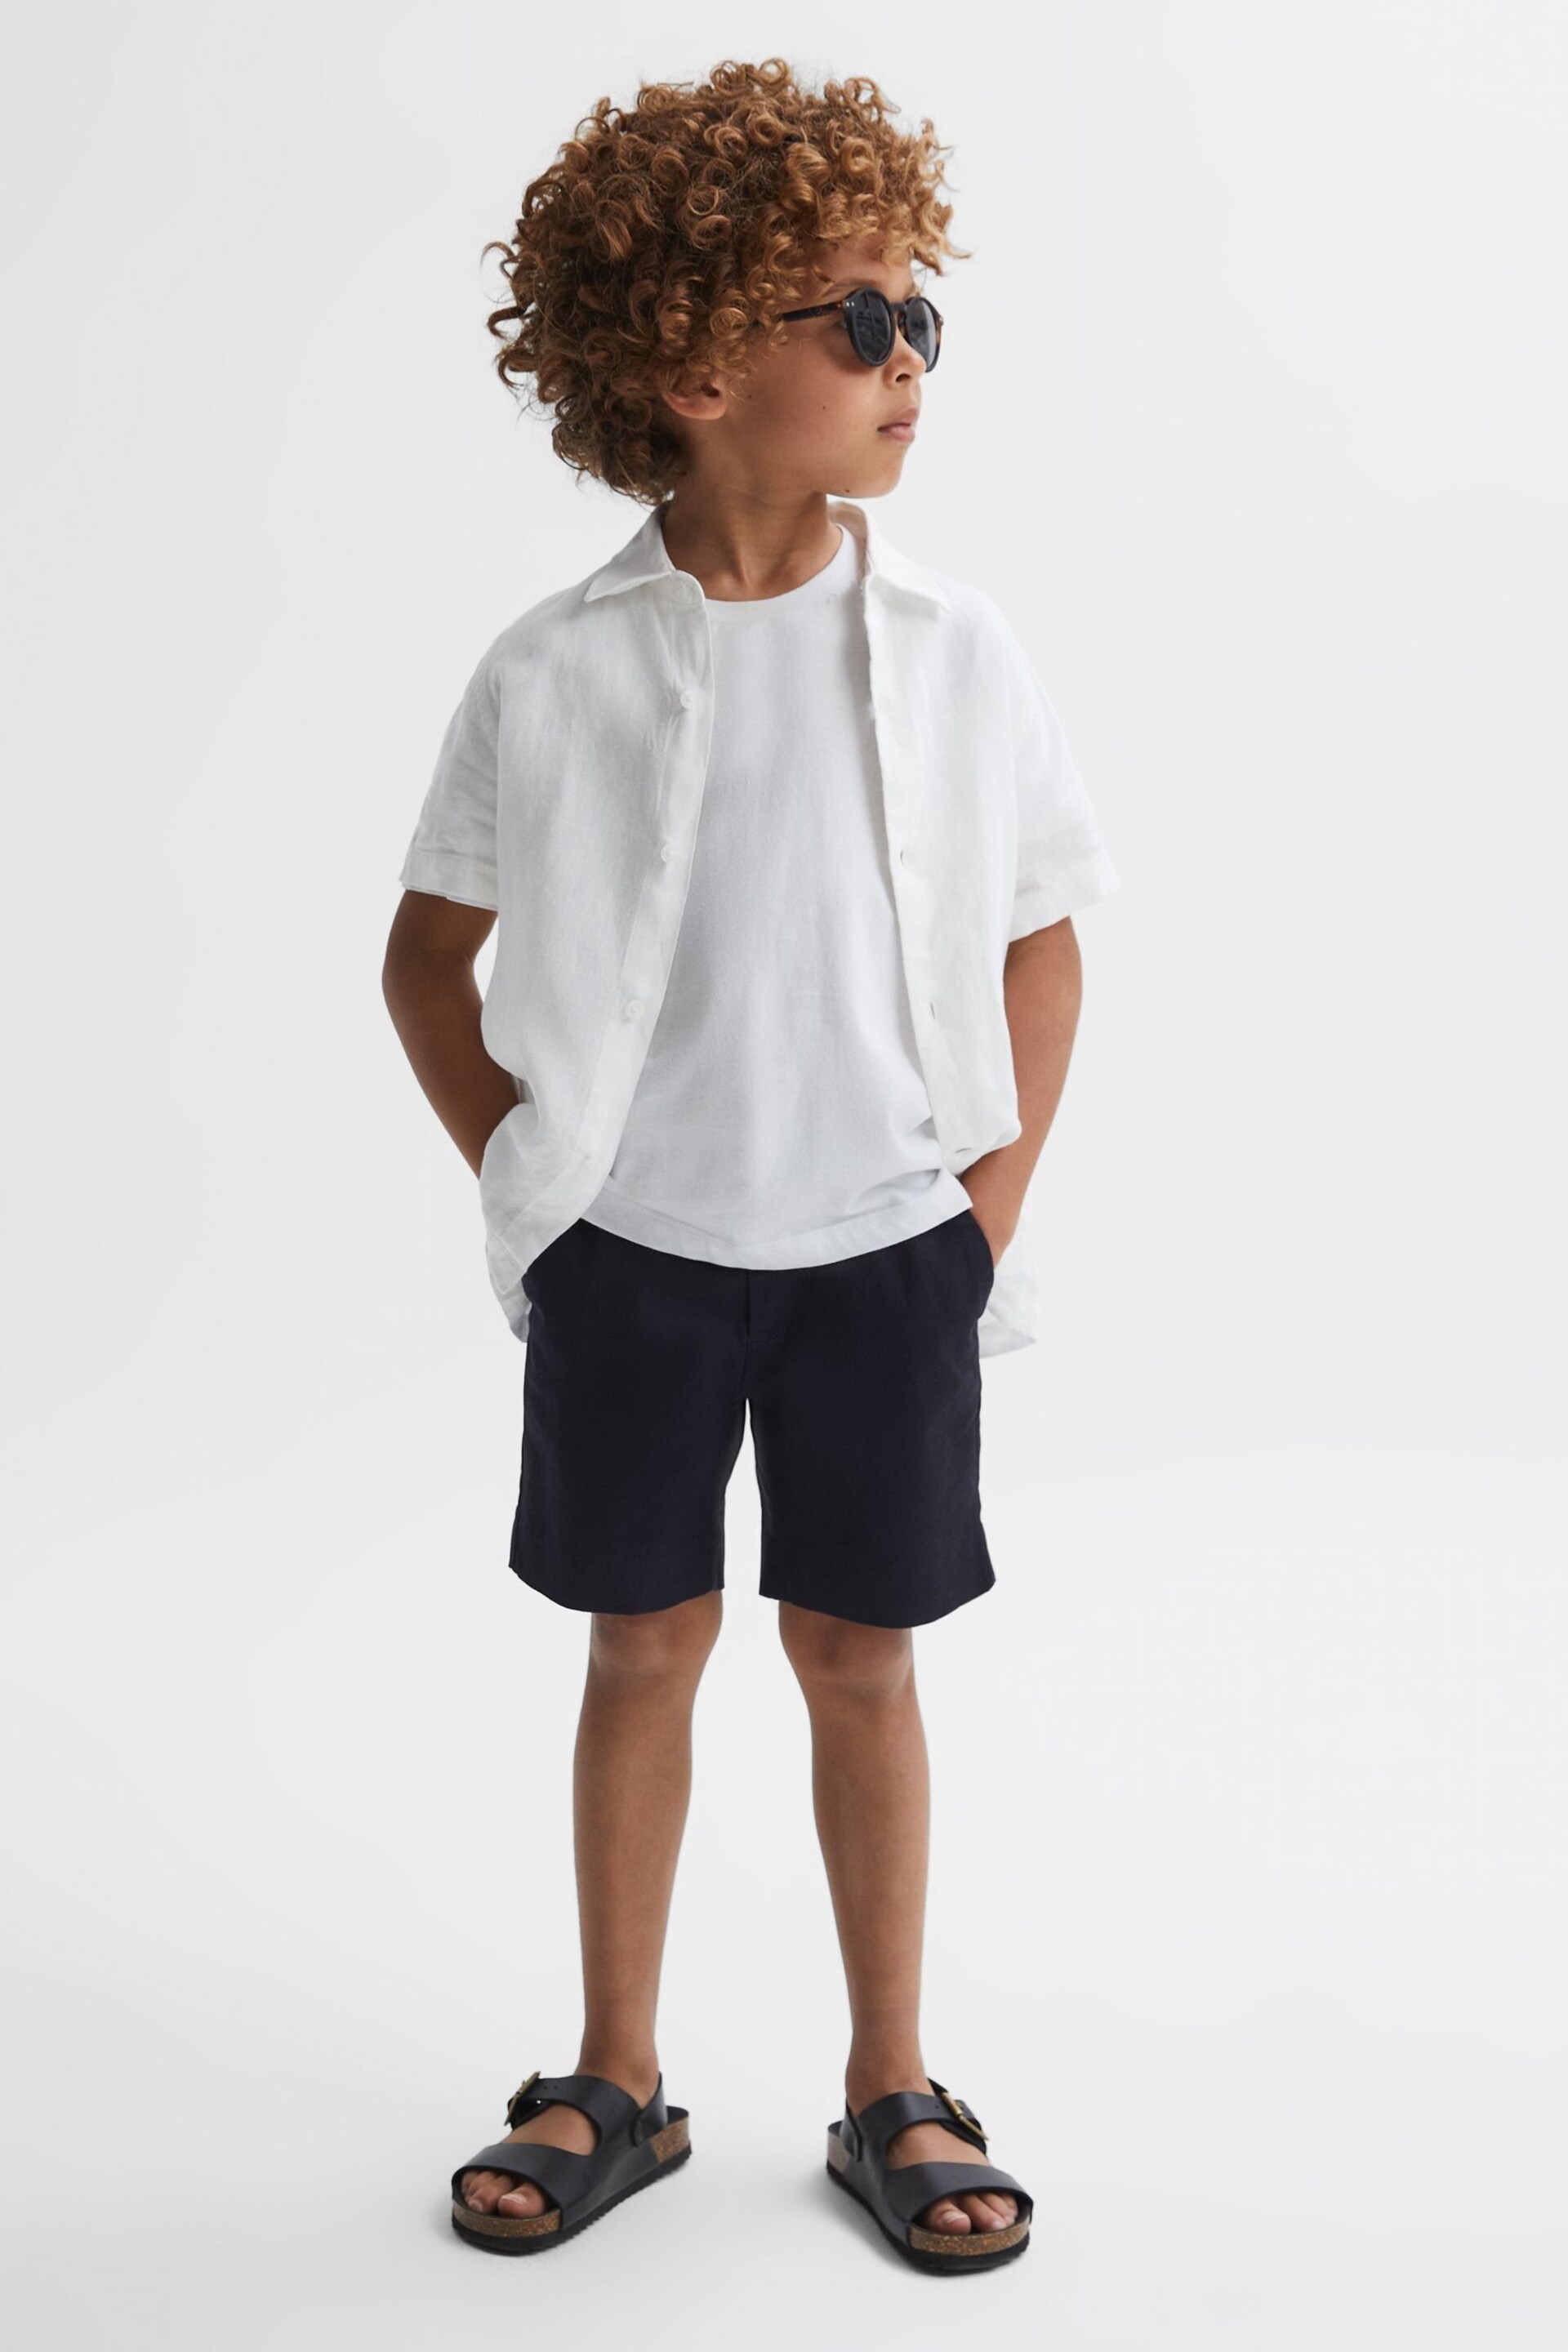 Reiss Navy Wicket Junior Casual Chino Shorts - Image 1 of 5